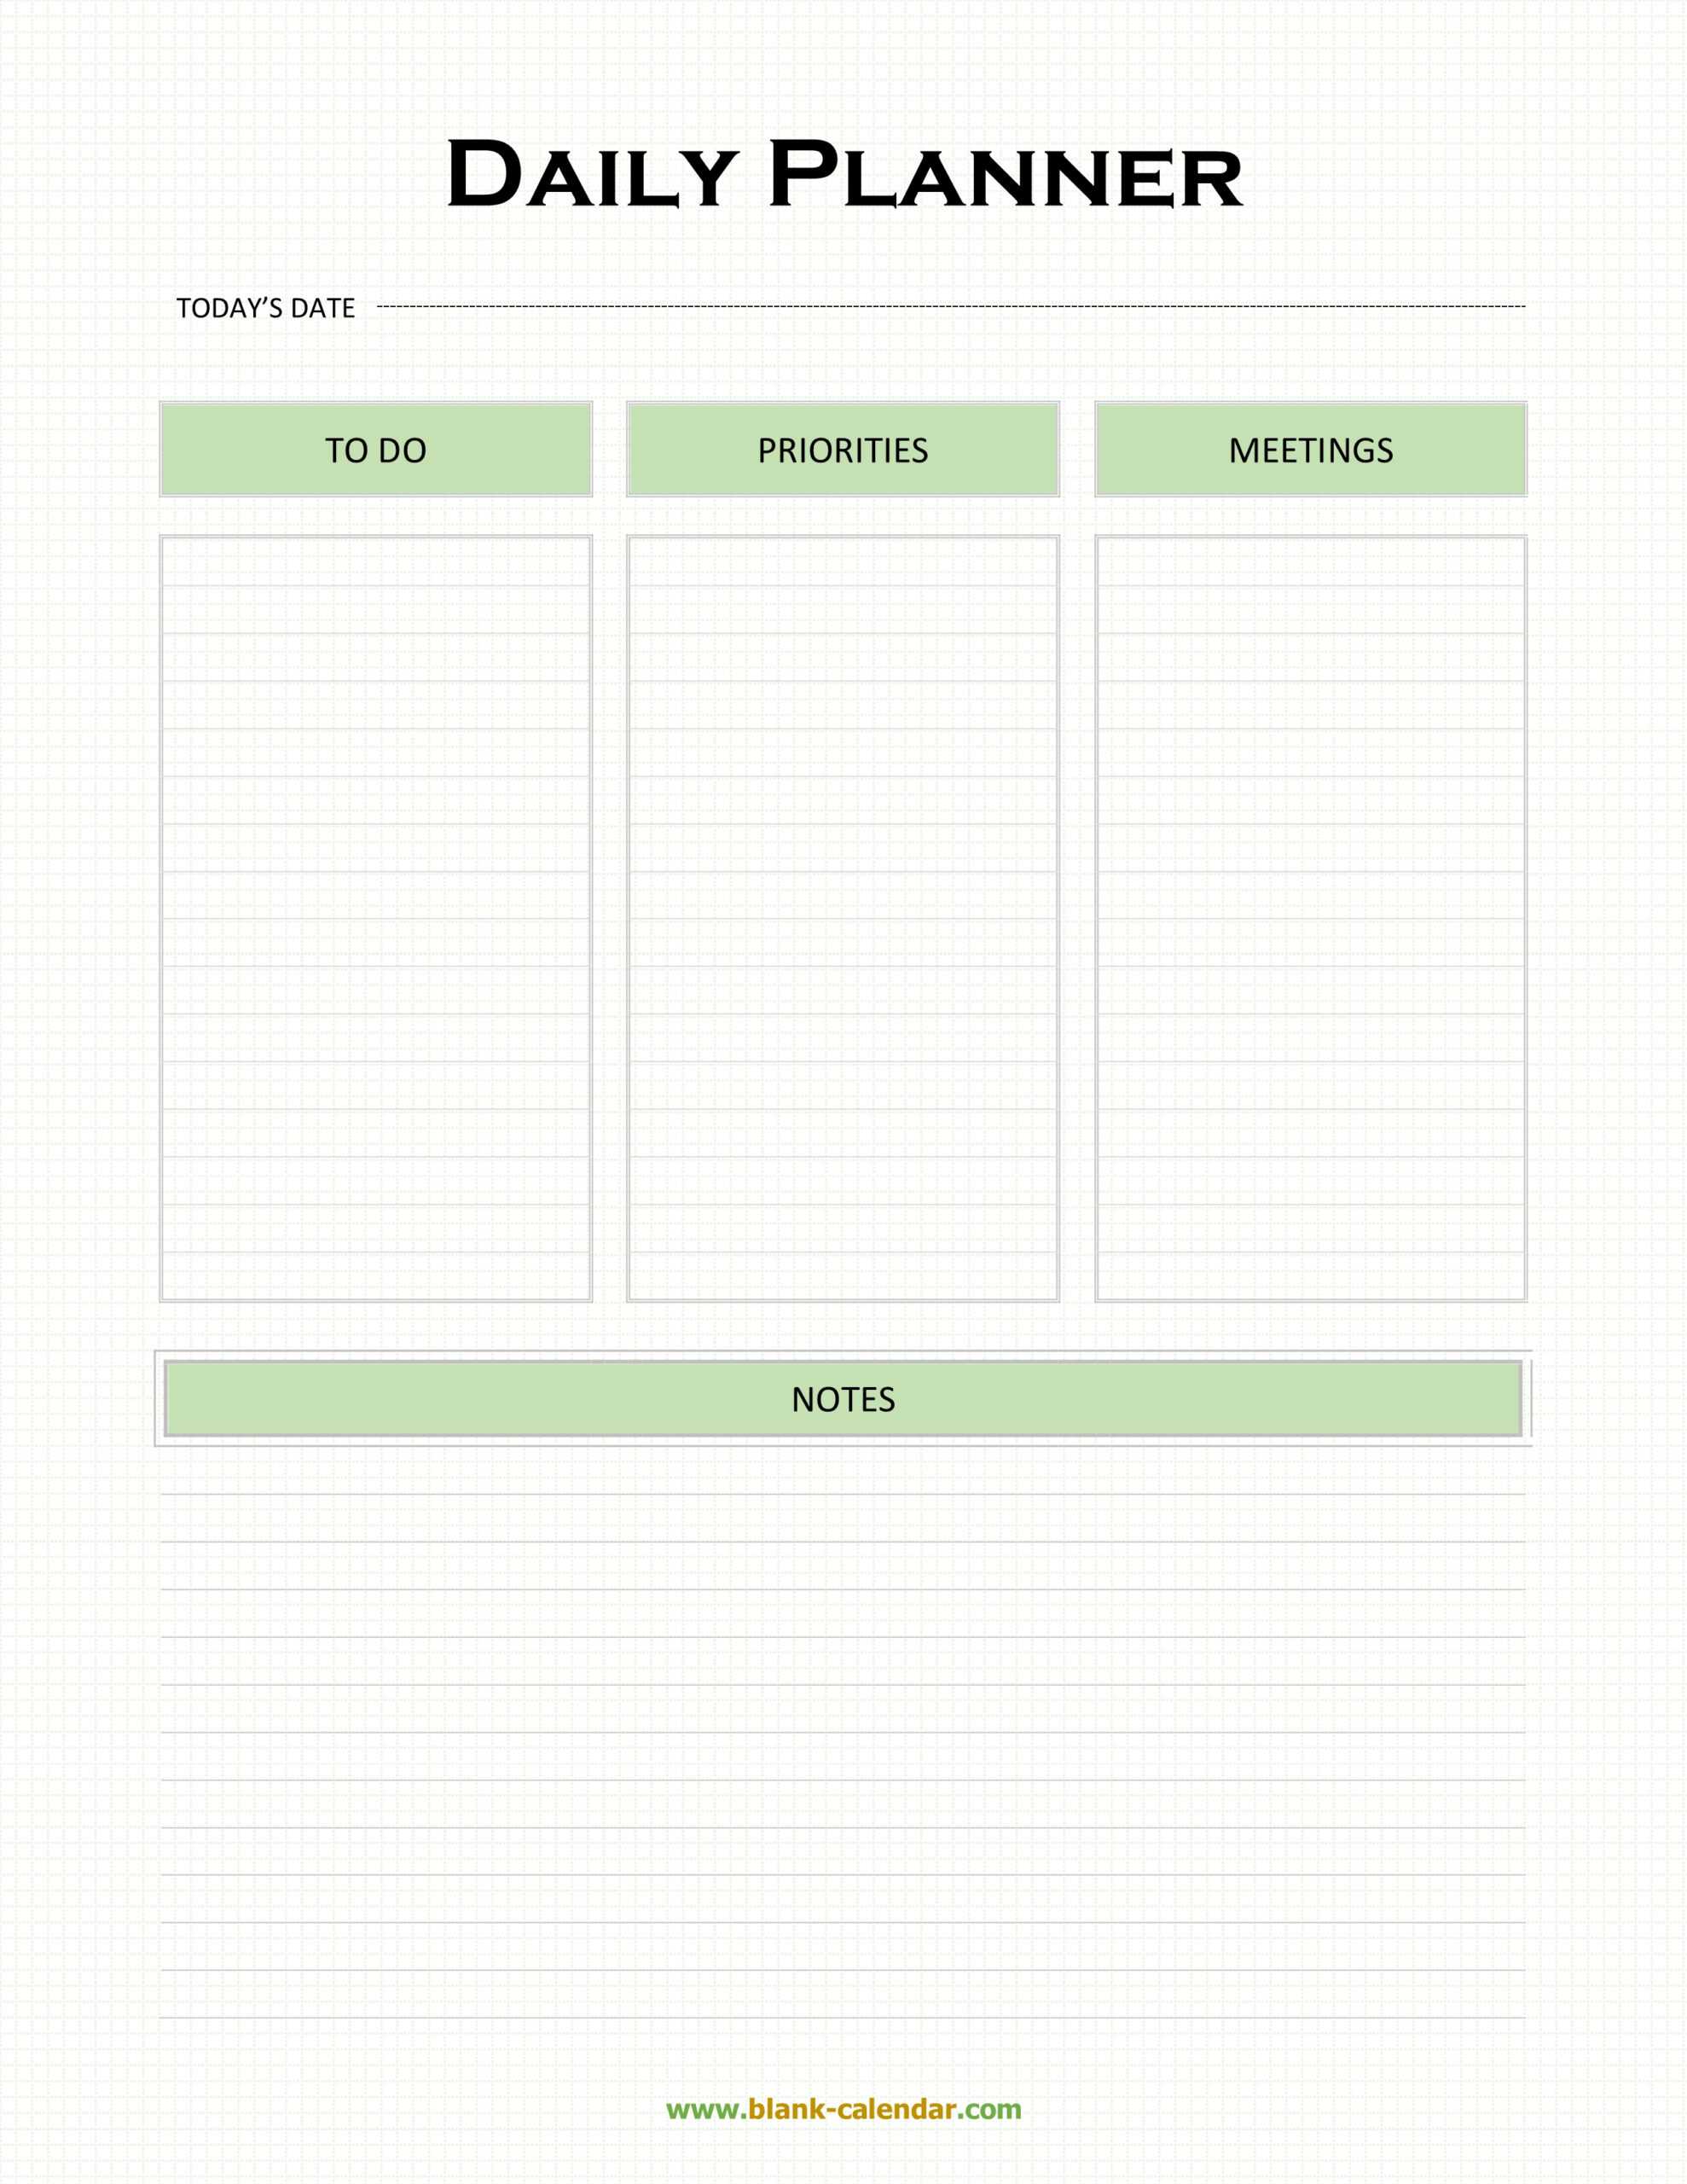 Daily Planner Templates (Word, Excel, Pdf) With Regard To Printable Blank Daily Schedule Template